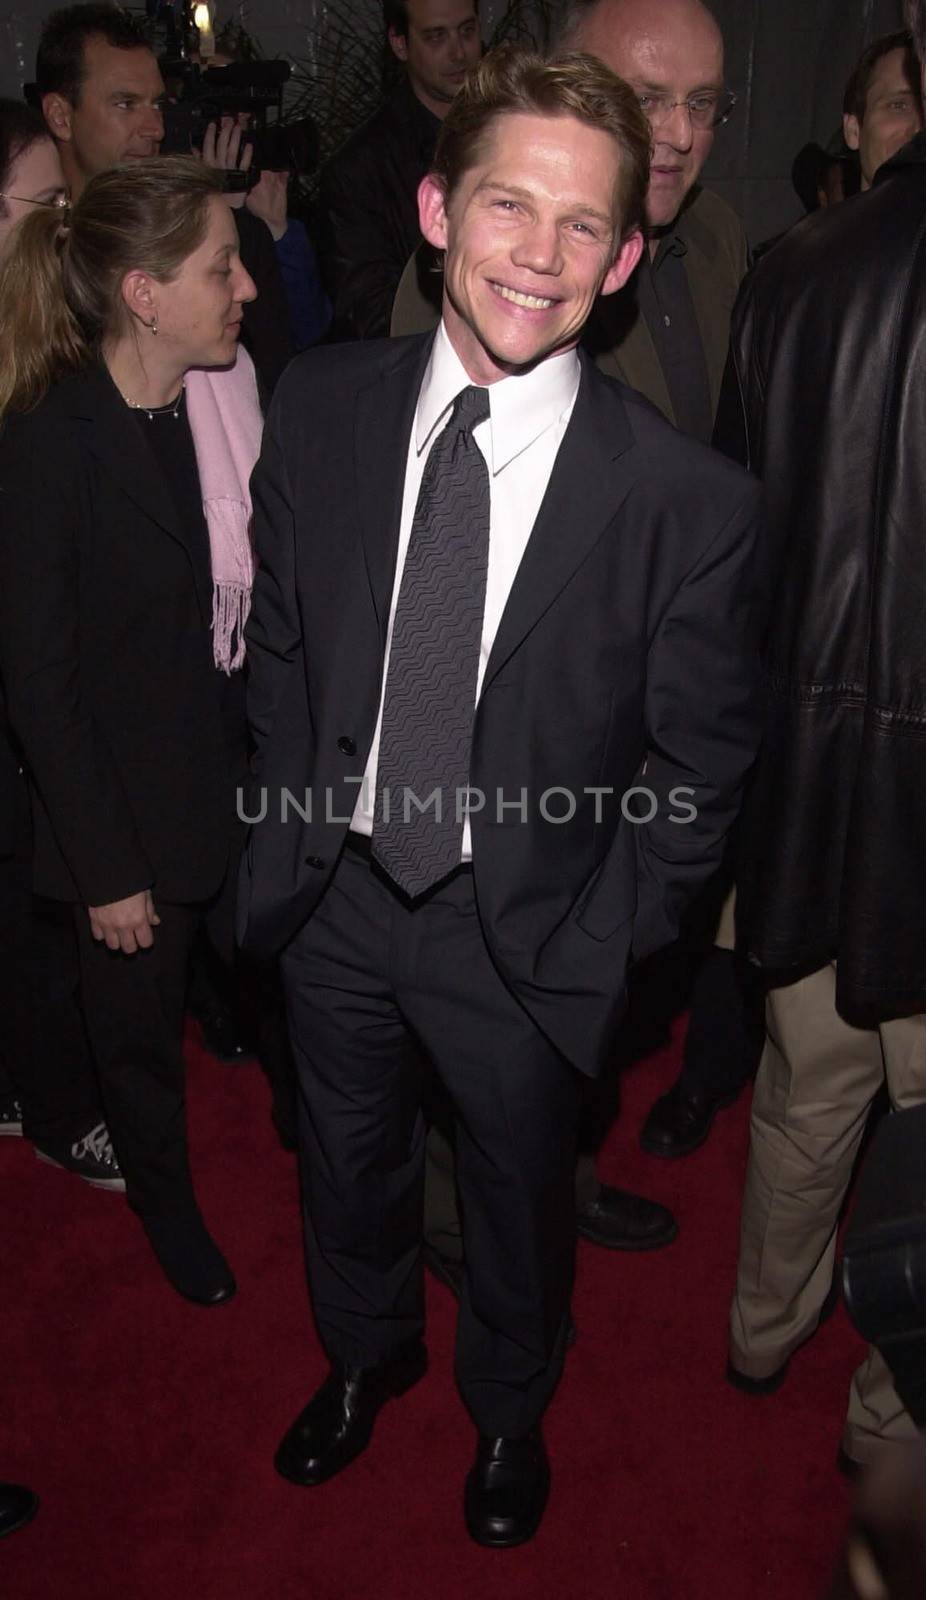 Jack Noseworthy at the premiere of Universal's "U-571" in Westwood, 04-17-00